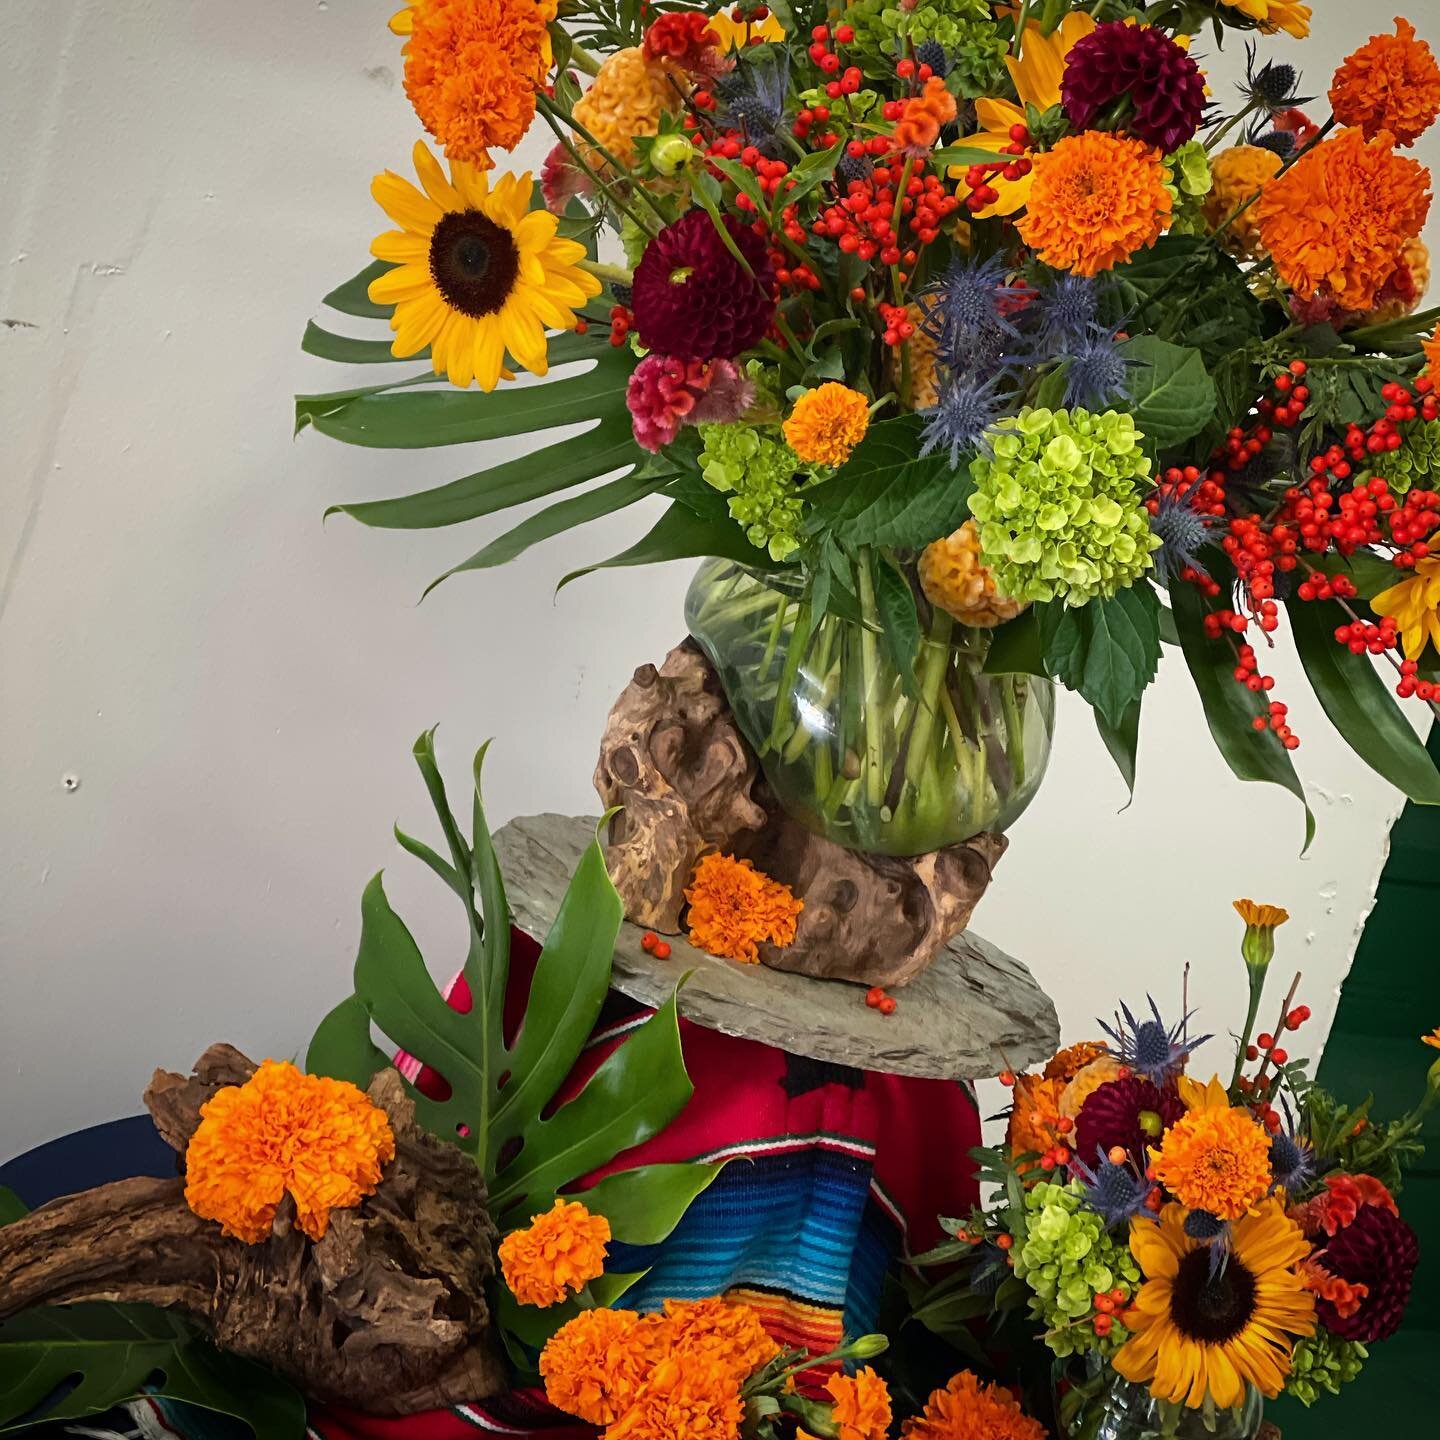 This pretty was designed by @findleyvicky and has beautiful bold colors. Flowers include sunflowers, mini green hydrangea, thistle, ilex berries, beautiful celosia, marigold, italian ruskus, and monstera leaves. @florasourcekansascity @kcbloomhub #fl